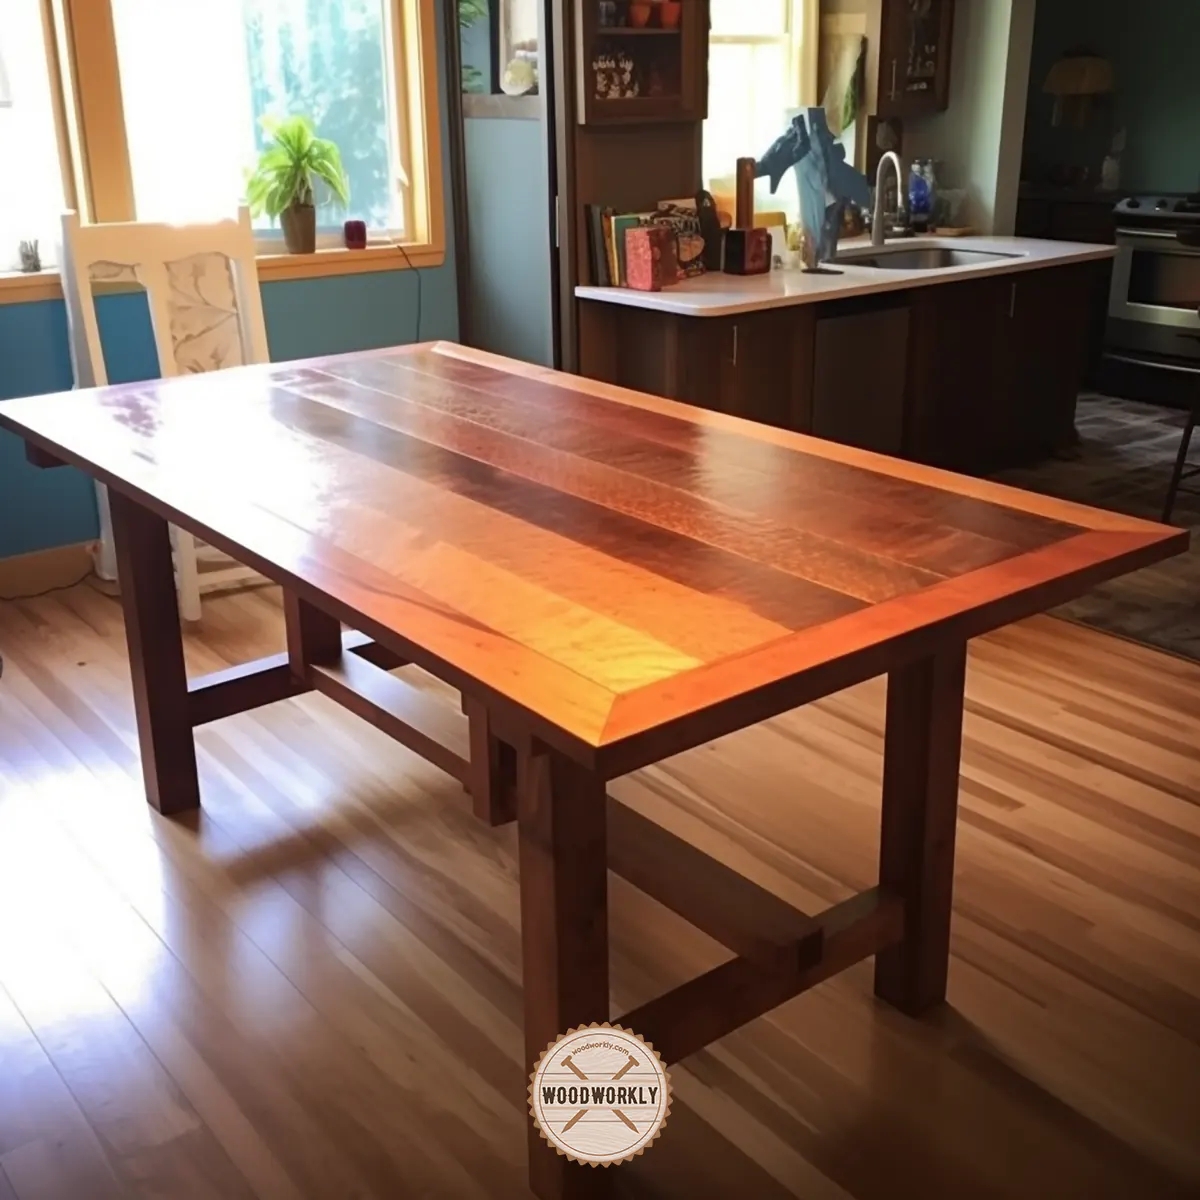 Dining table stained by mixing red and brown color stains